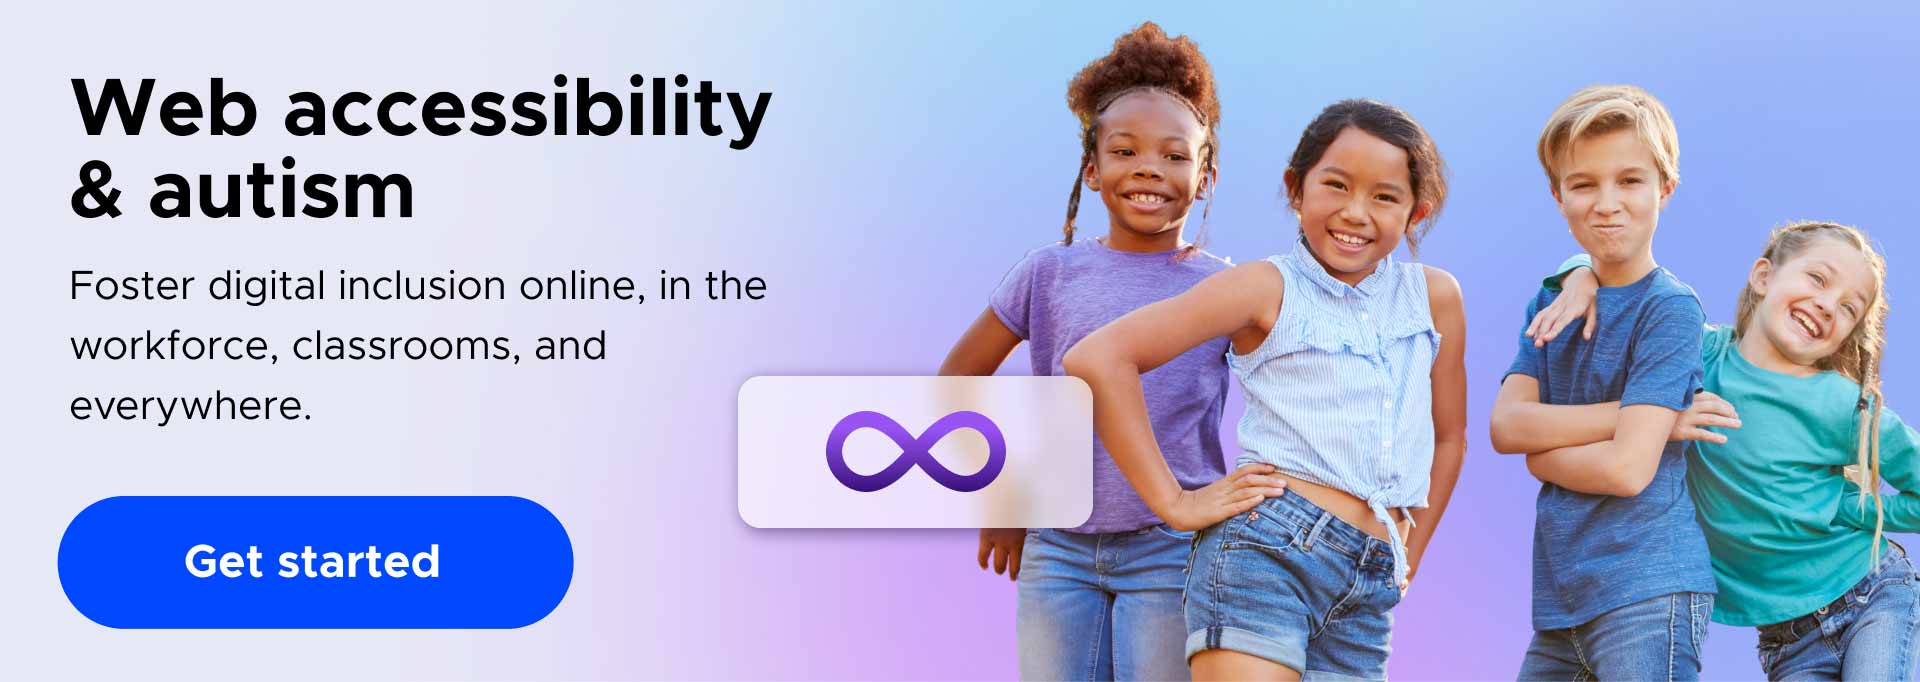 Four smiling children, text "Web accessibility & autism," and a "Get started" button, with a gradient background 